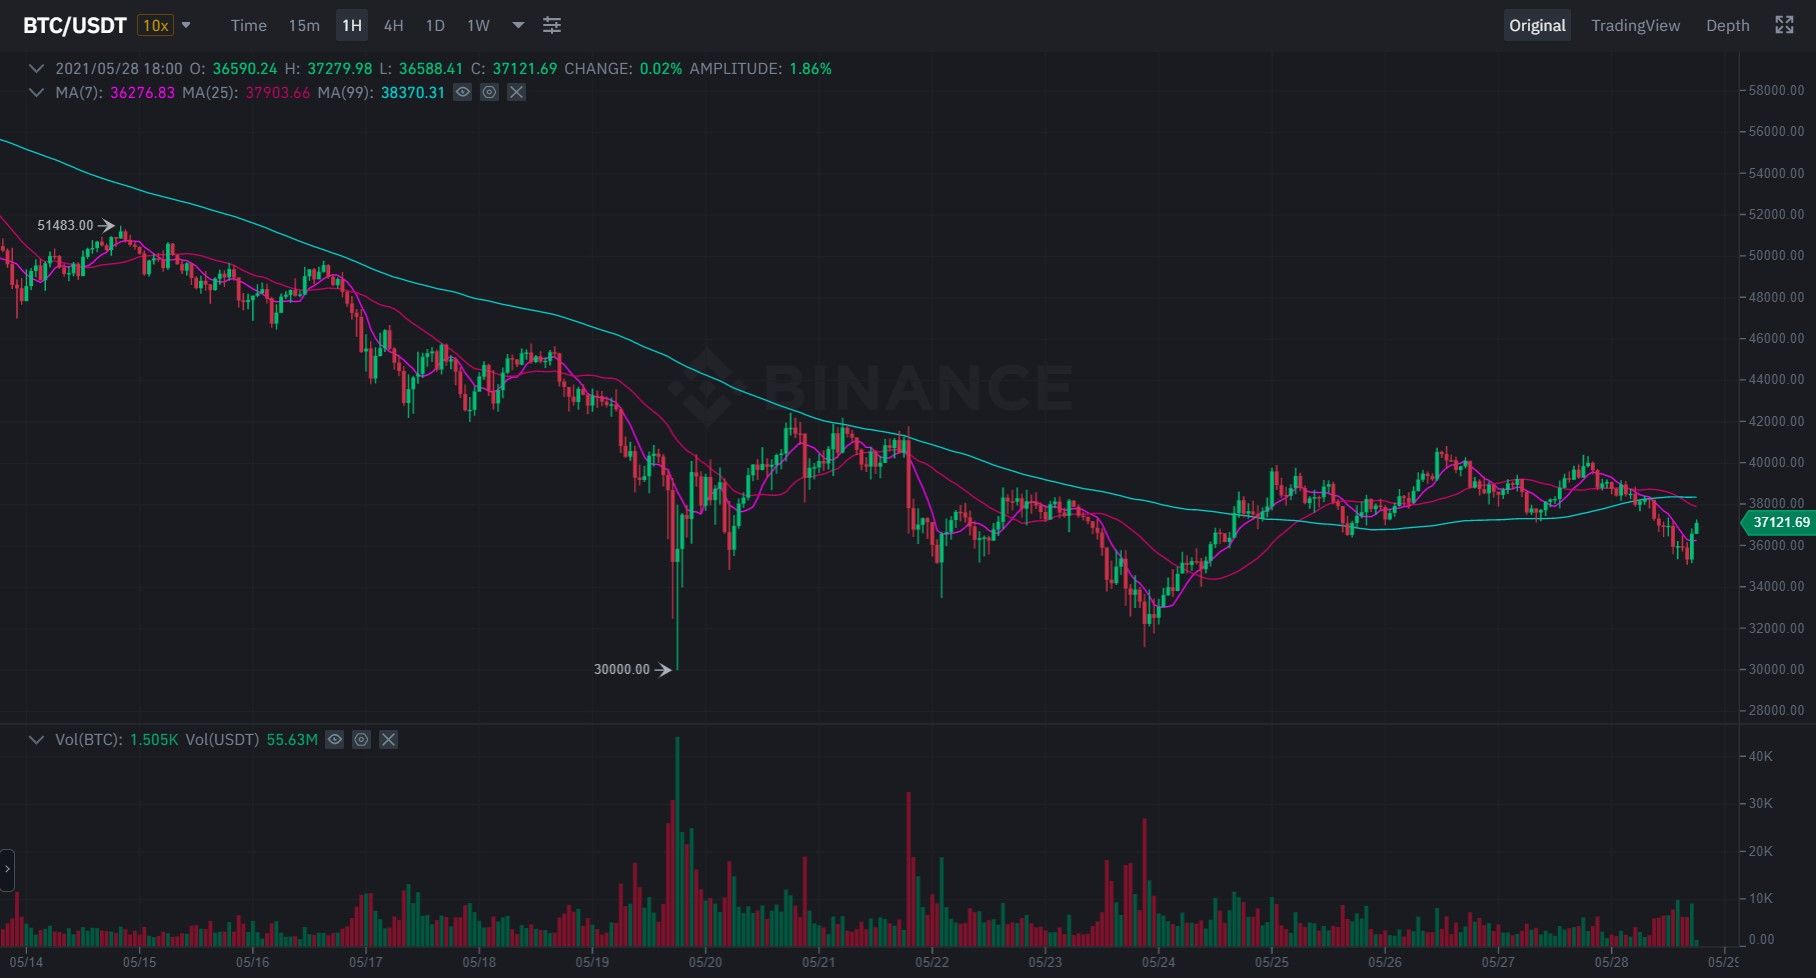 Bitcoin Price Trend Over the Last One Week: Effects of Chinese Ban